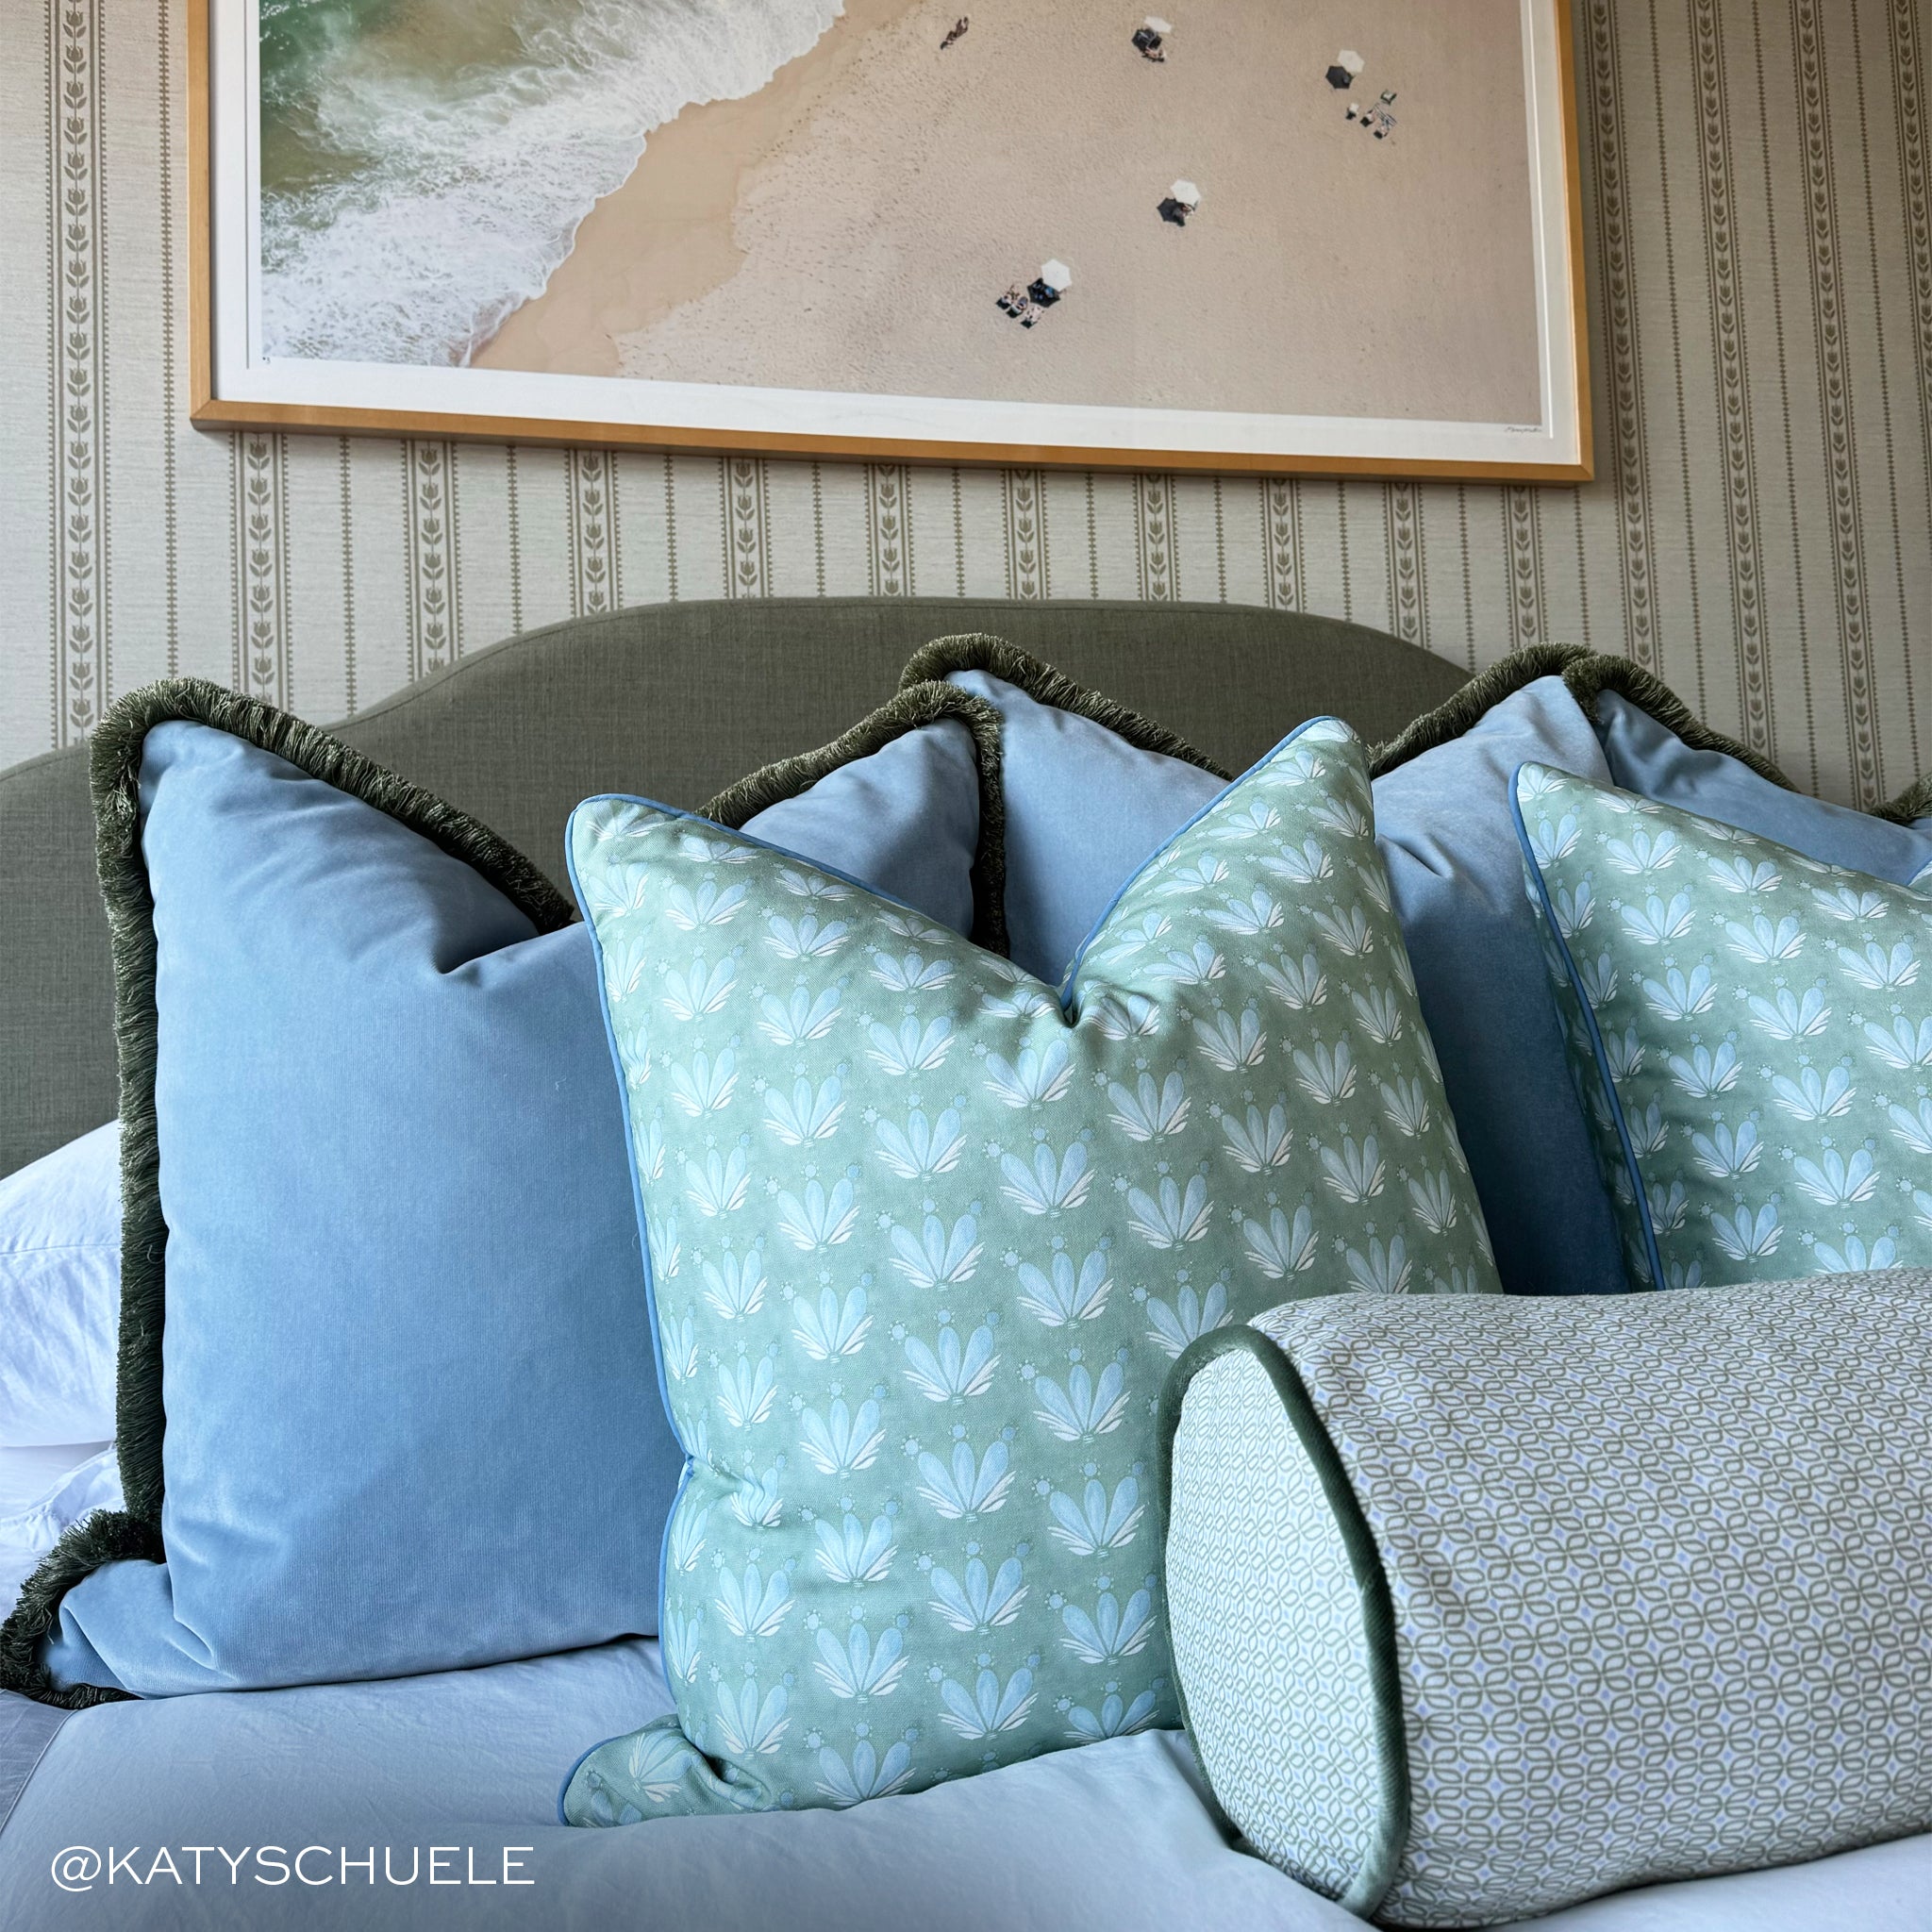 close up of bed with sky blue velvet pillows on it and blue green floral repeat pattern pillows on it with striped wallpaper on the walls